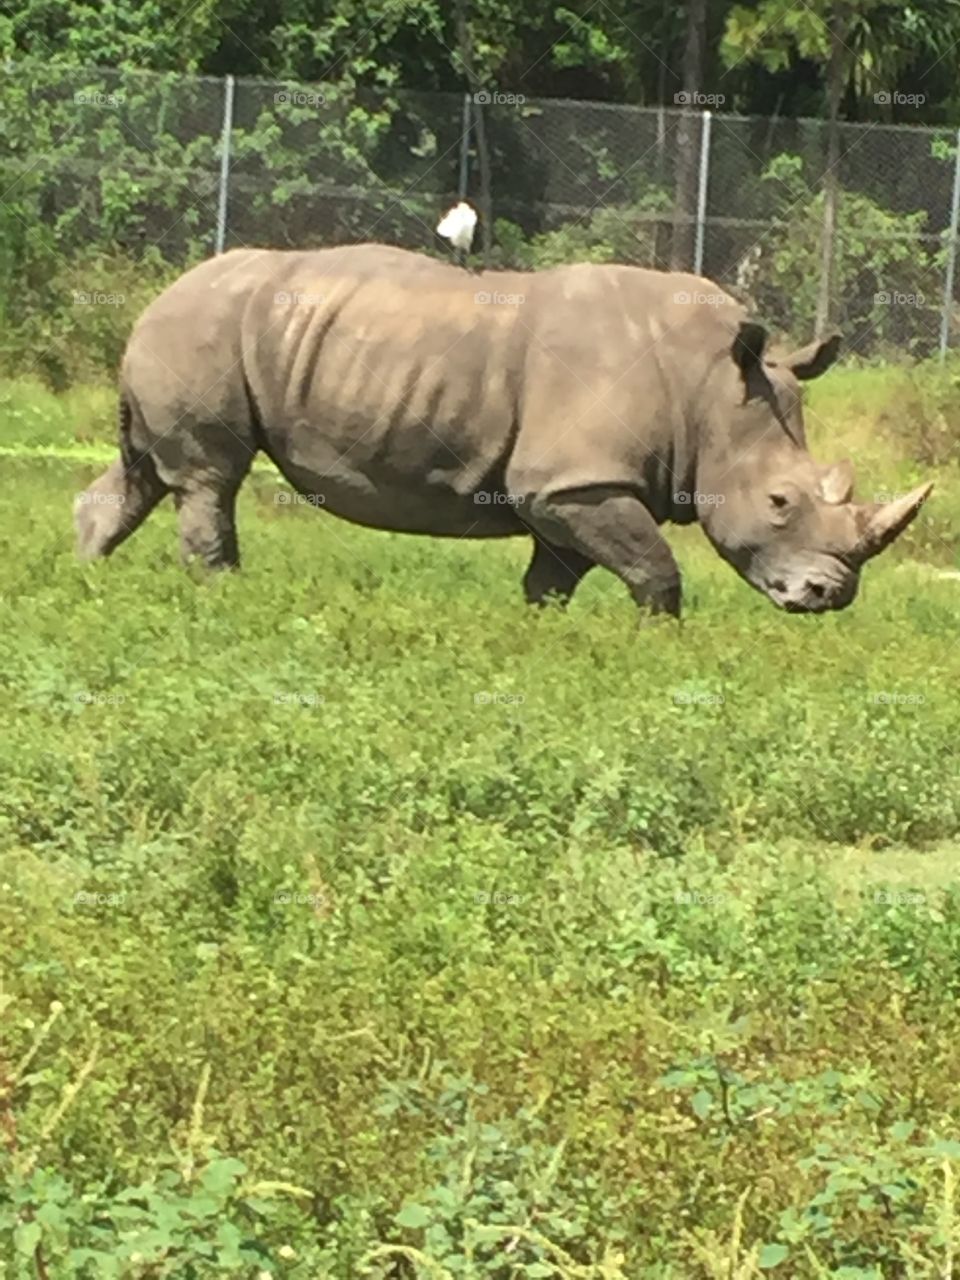 Rhino outside gorgeous in nature